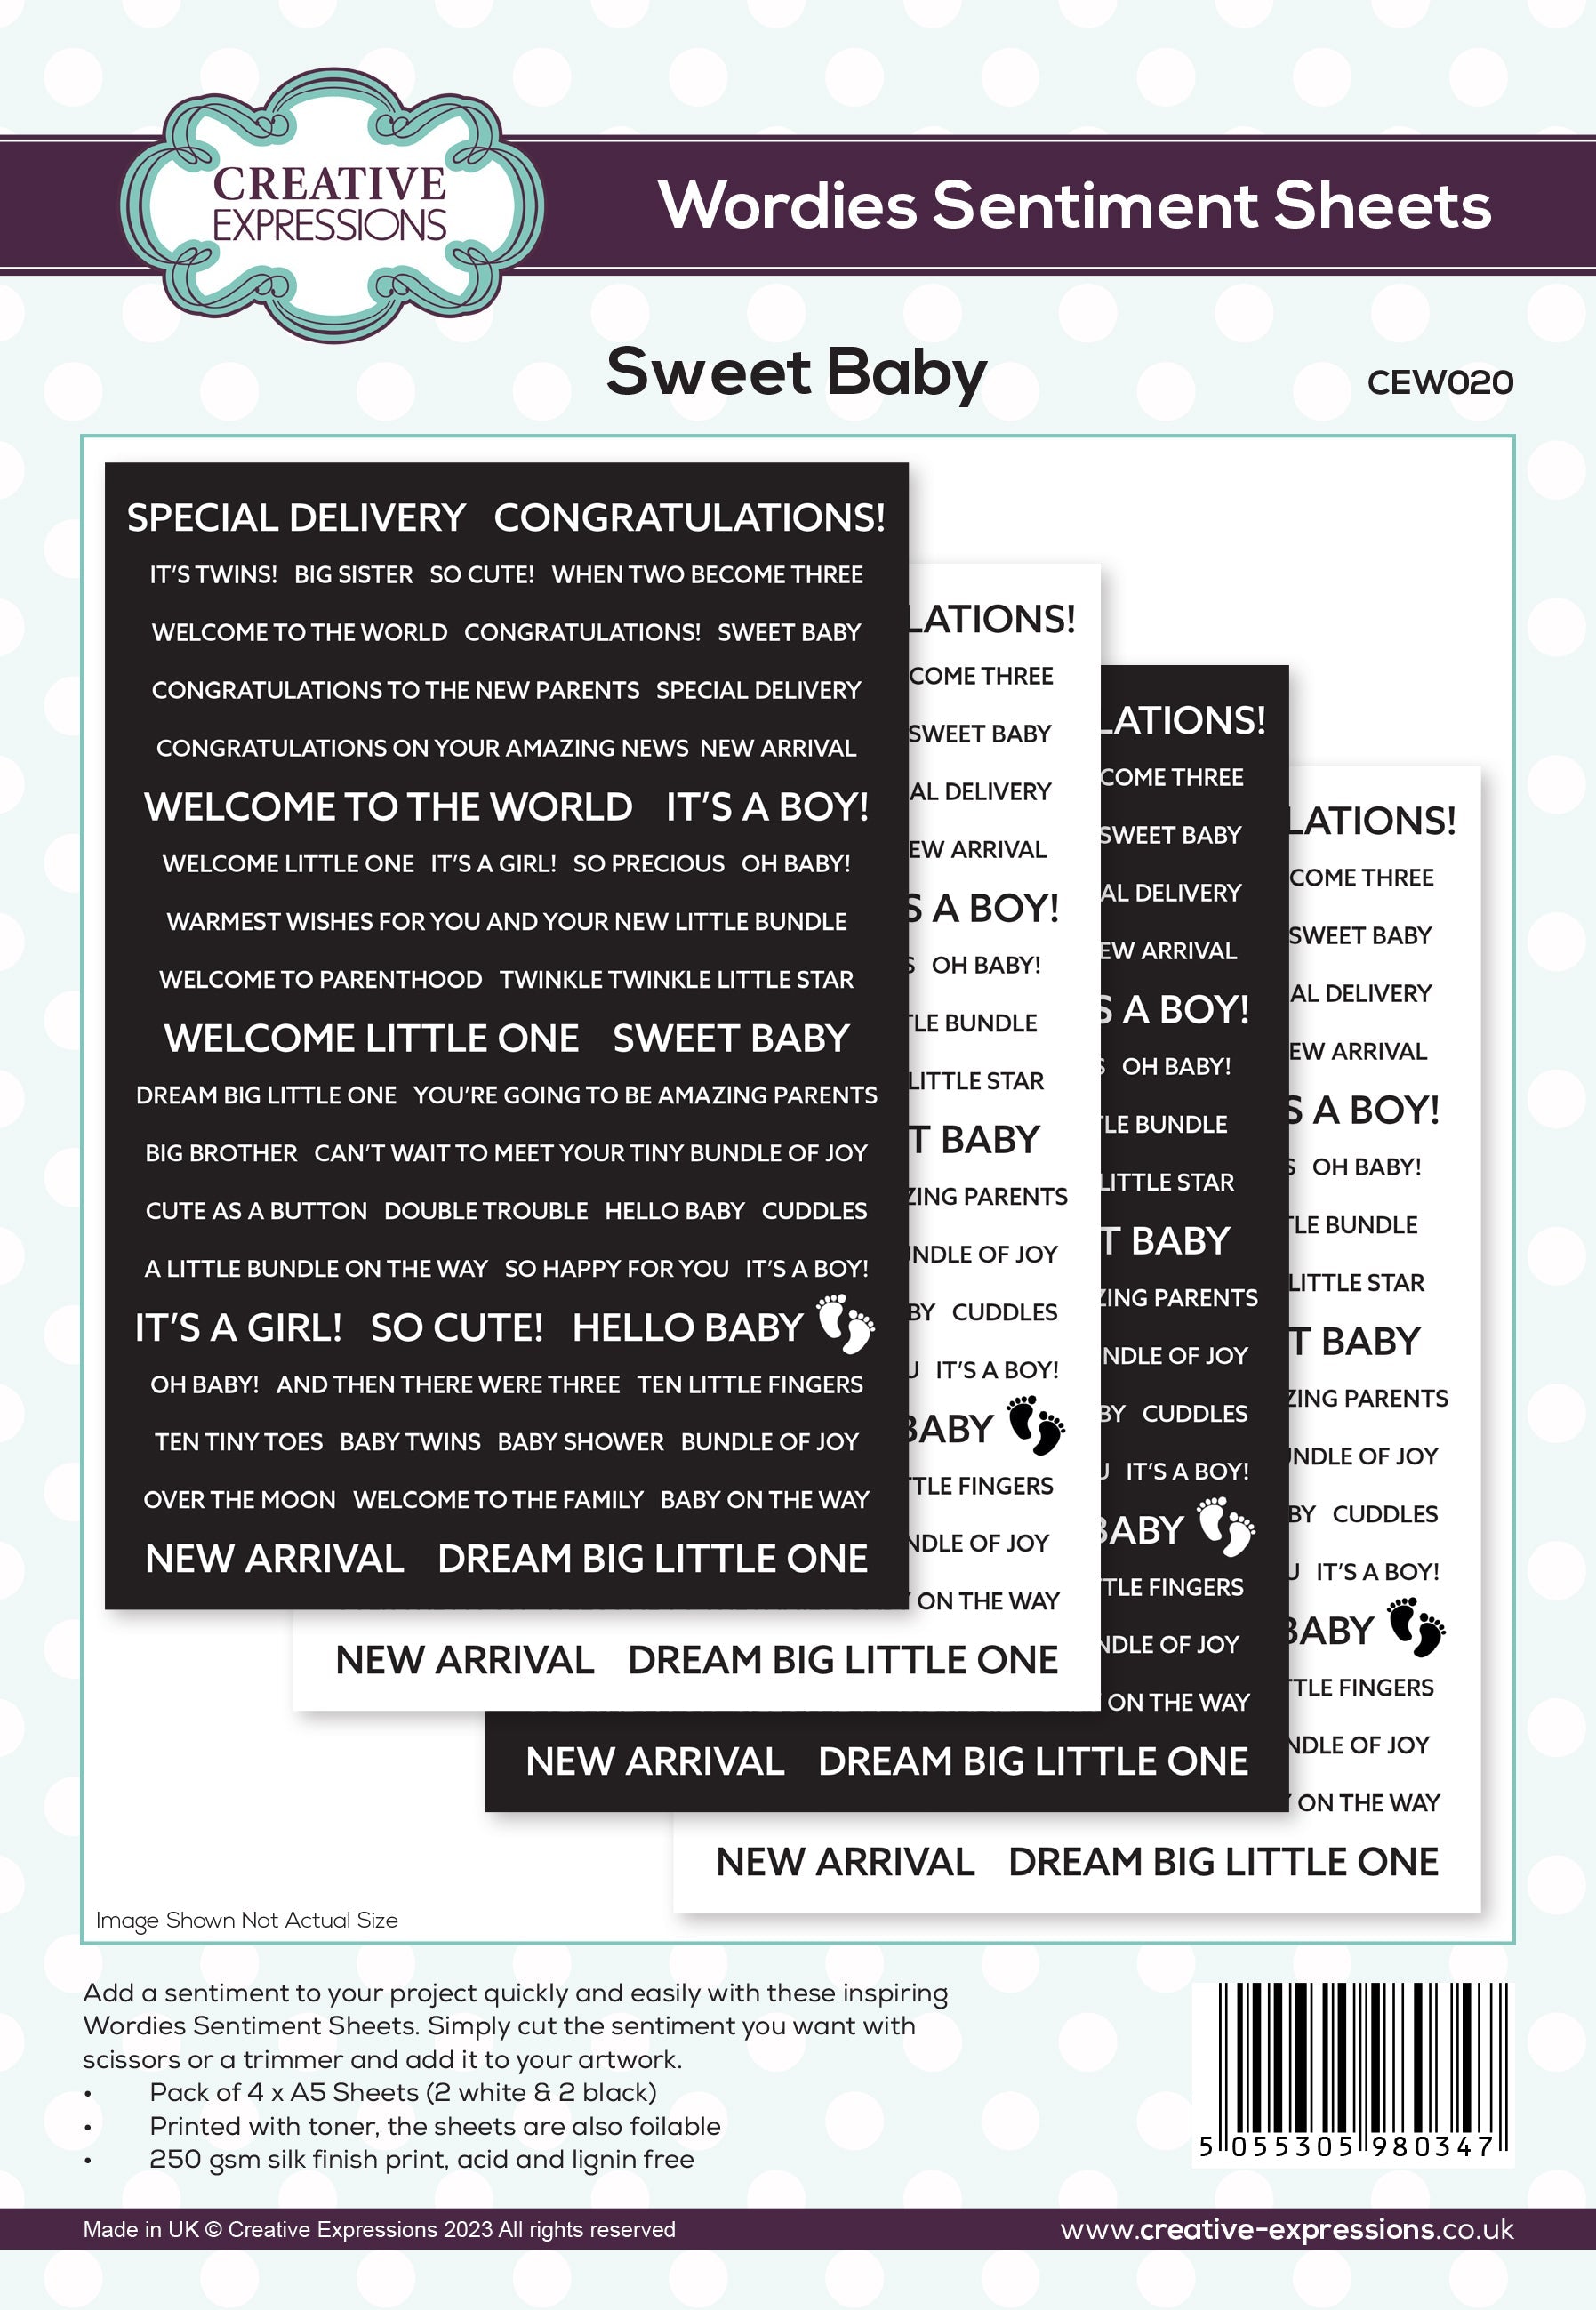 Creative Expressions Wordies Sentiment Sheets Sweet Baby Pk 4 6 in x 8 in